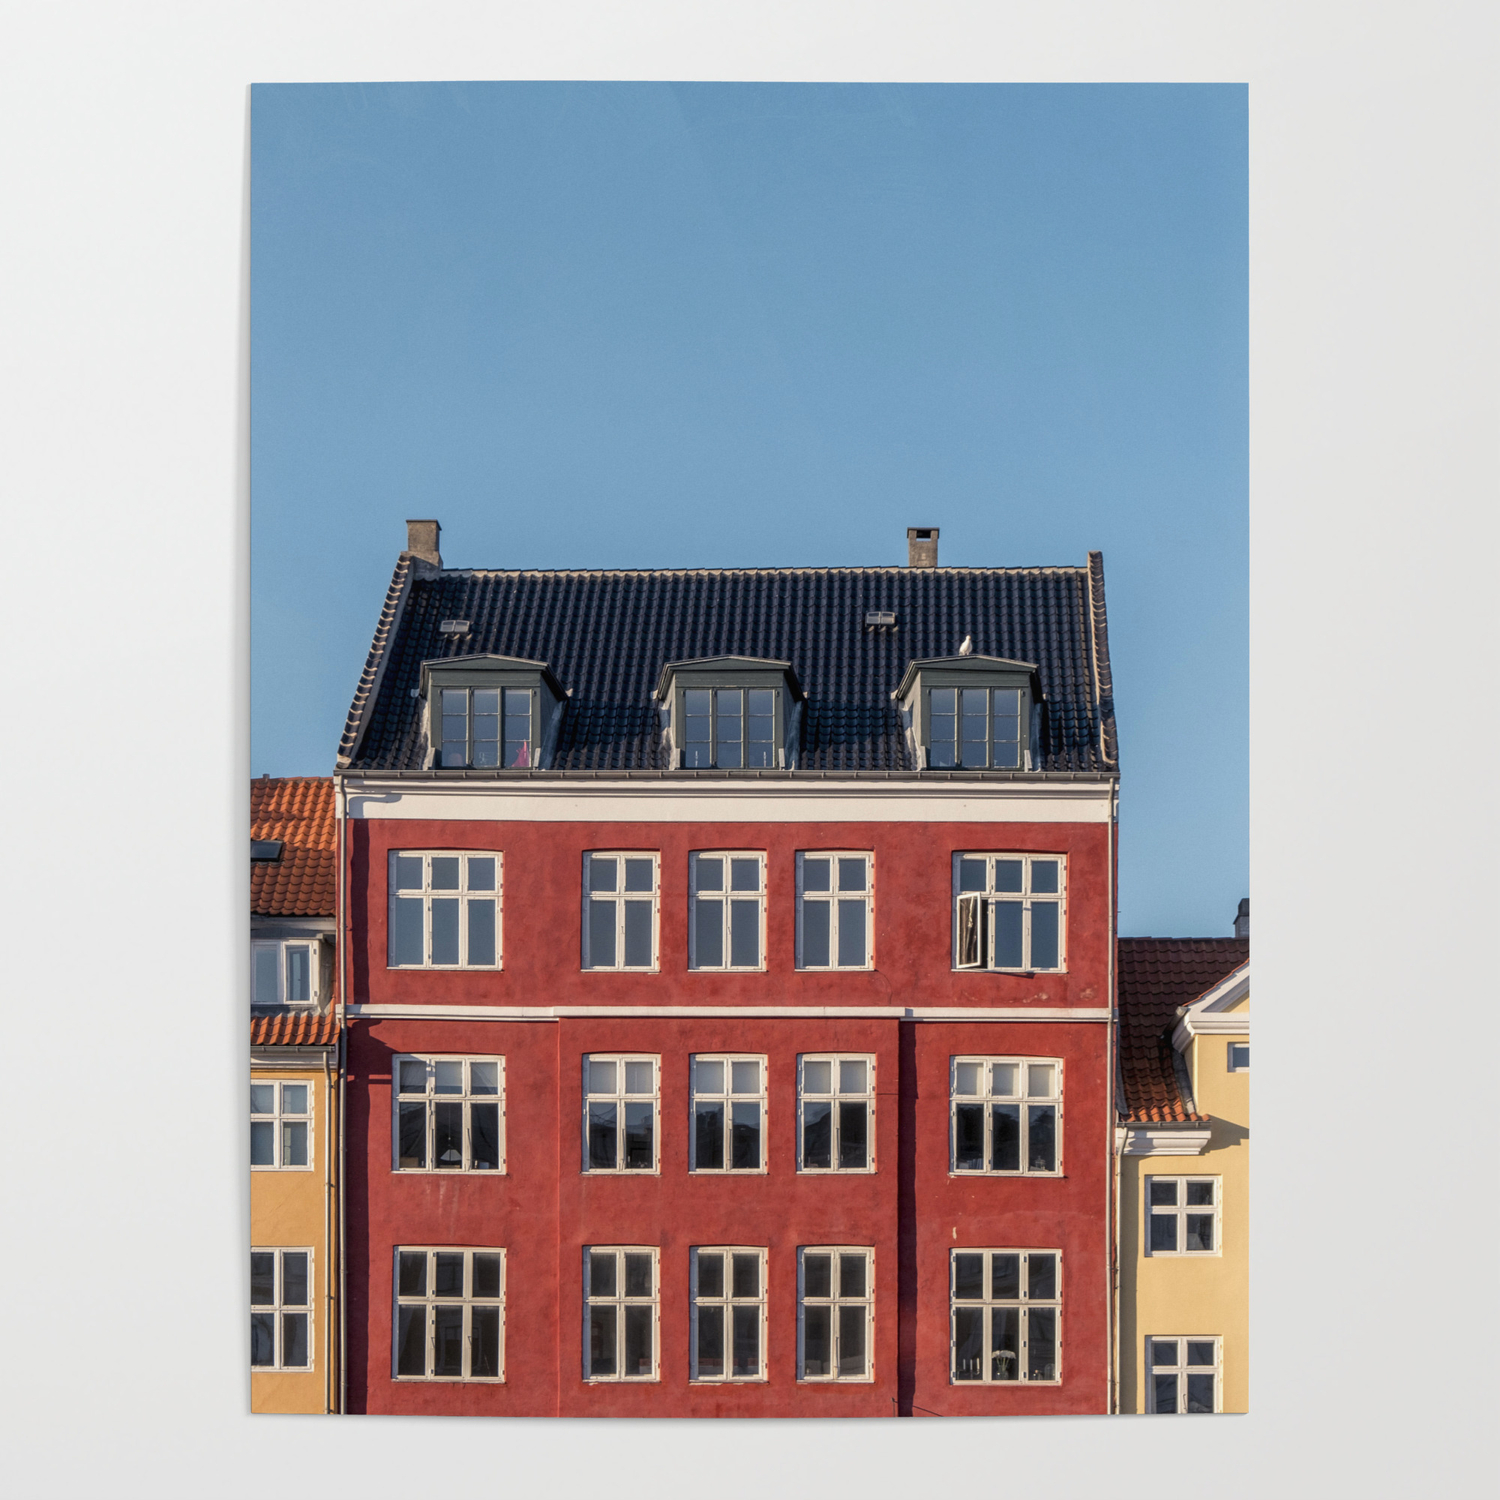 Colorful houses I Nyhavn, Denmark I architecture I Vintage pastel colors Poster by Floris Trapman Photography Society6